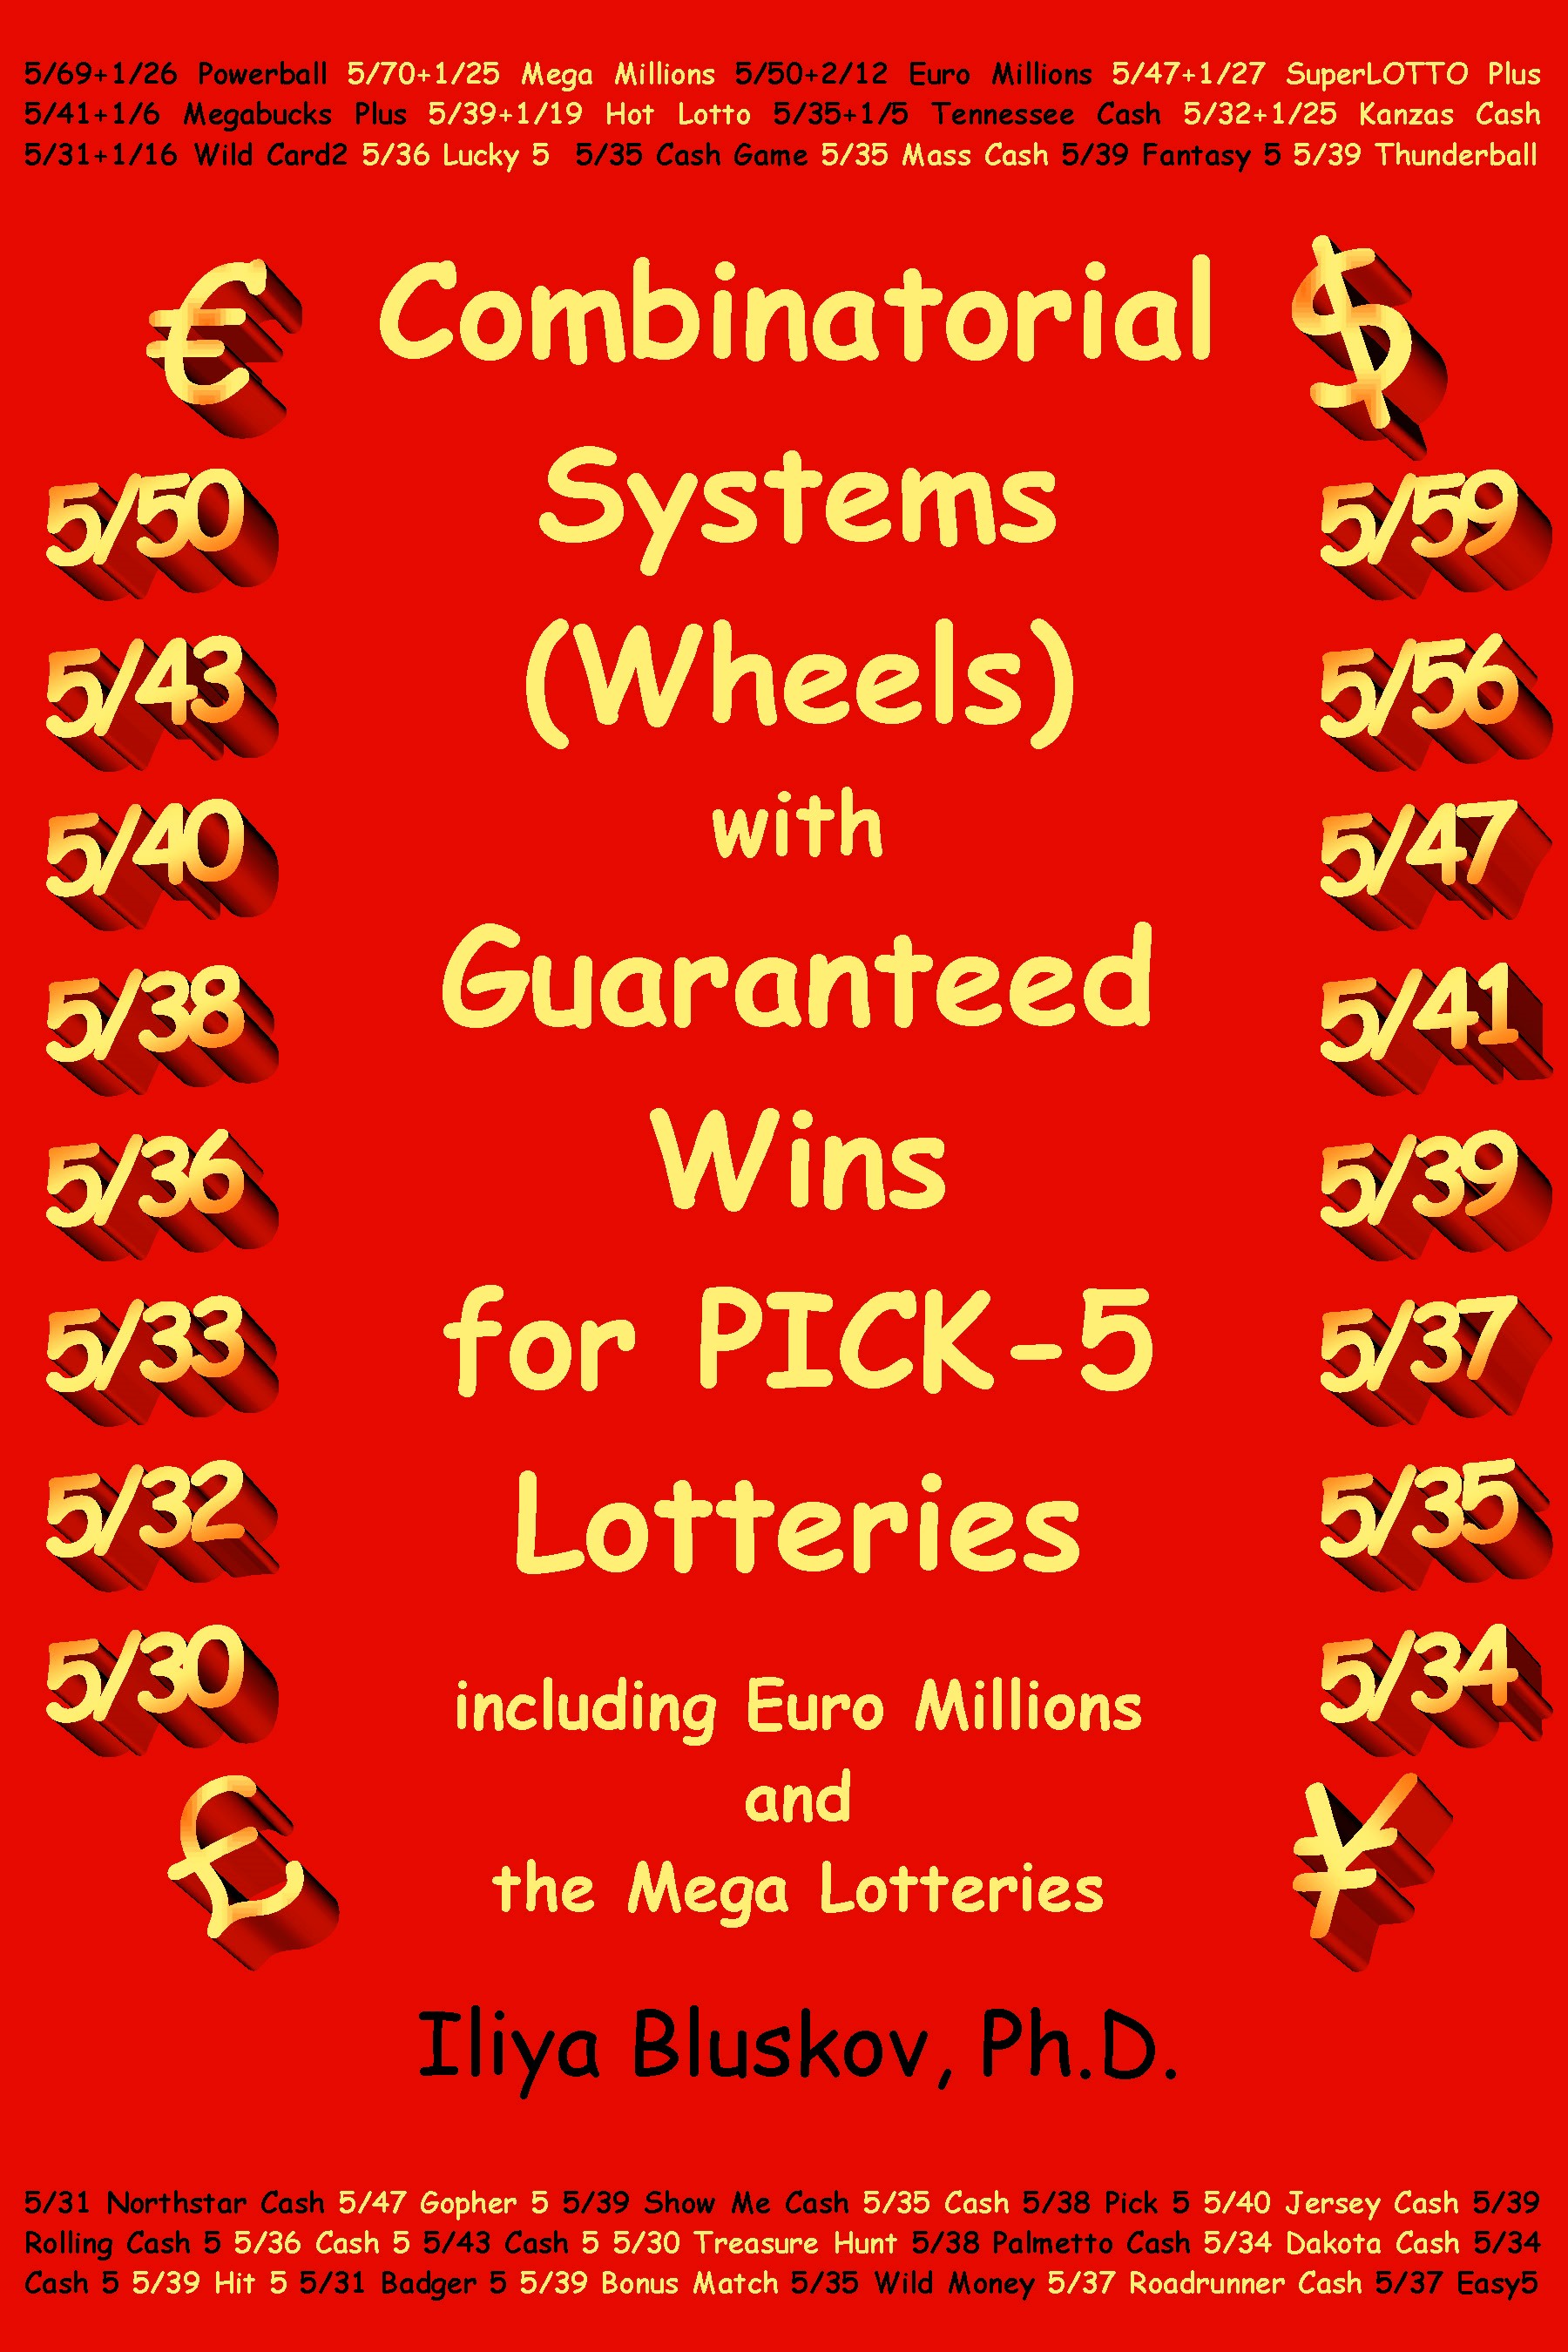 Finally An Automated Pick 5 Lotto/Lottery System That's Guaranteed to Win 